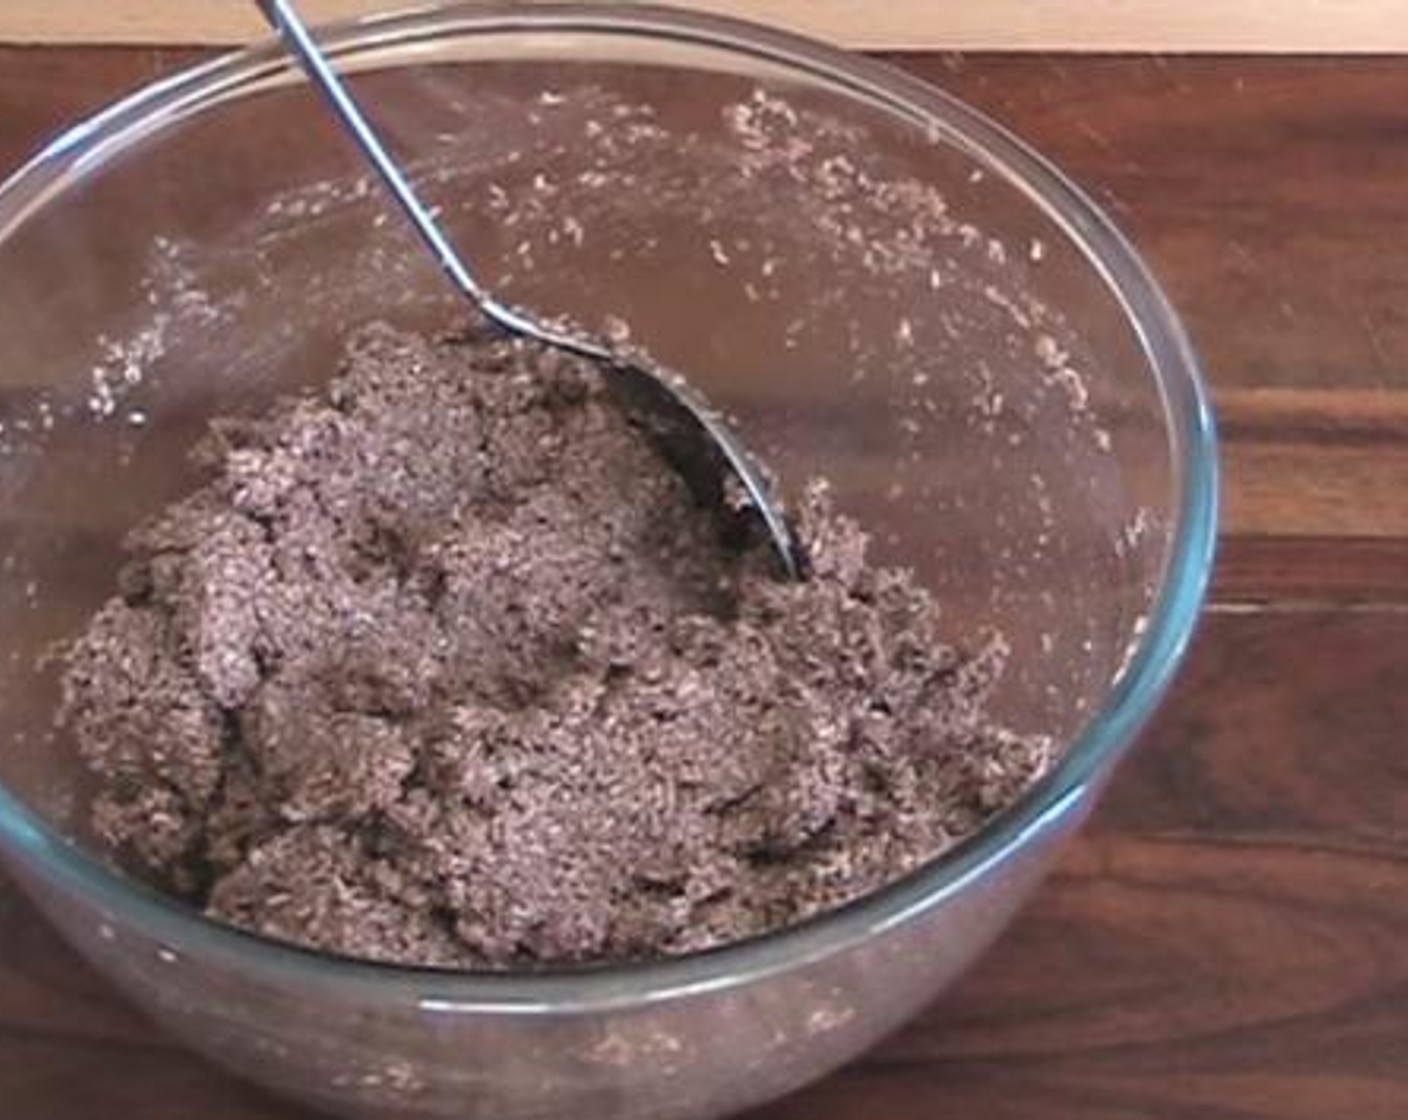 step 1 Into a mixing bowl, add and mix the Desiccated Coconut (2 cups), Caster Sugar (1/2 cup), and Unsweetened Cocoa Powder (1/2 Tbsp). Then add in the Eggs (2) and Milk (1/4 cup). Combine everything together.